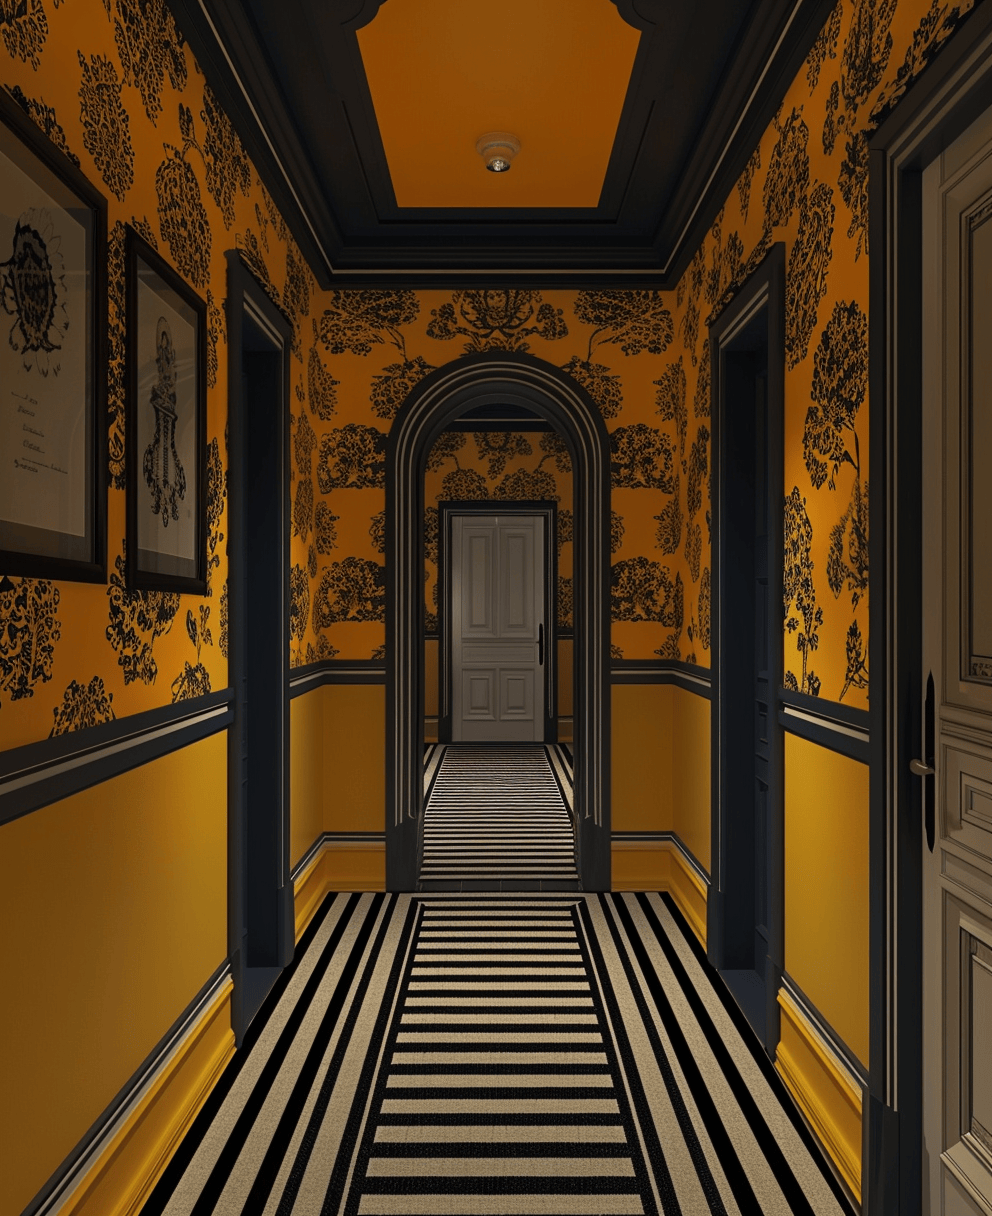 Vibrant Art Deco hallway decorated with zigzag patterns and step-designed moldings